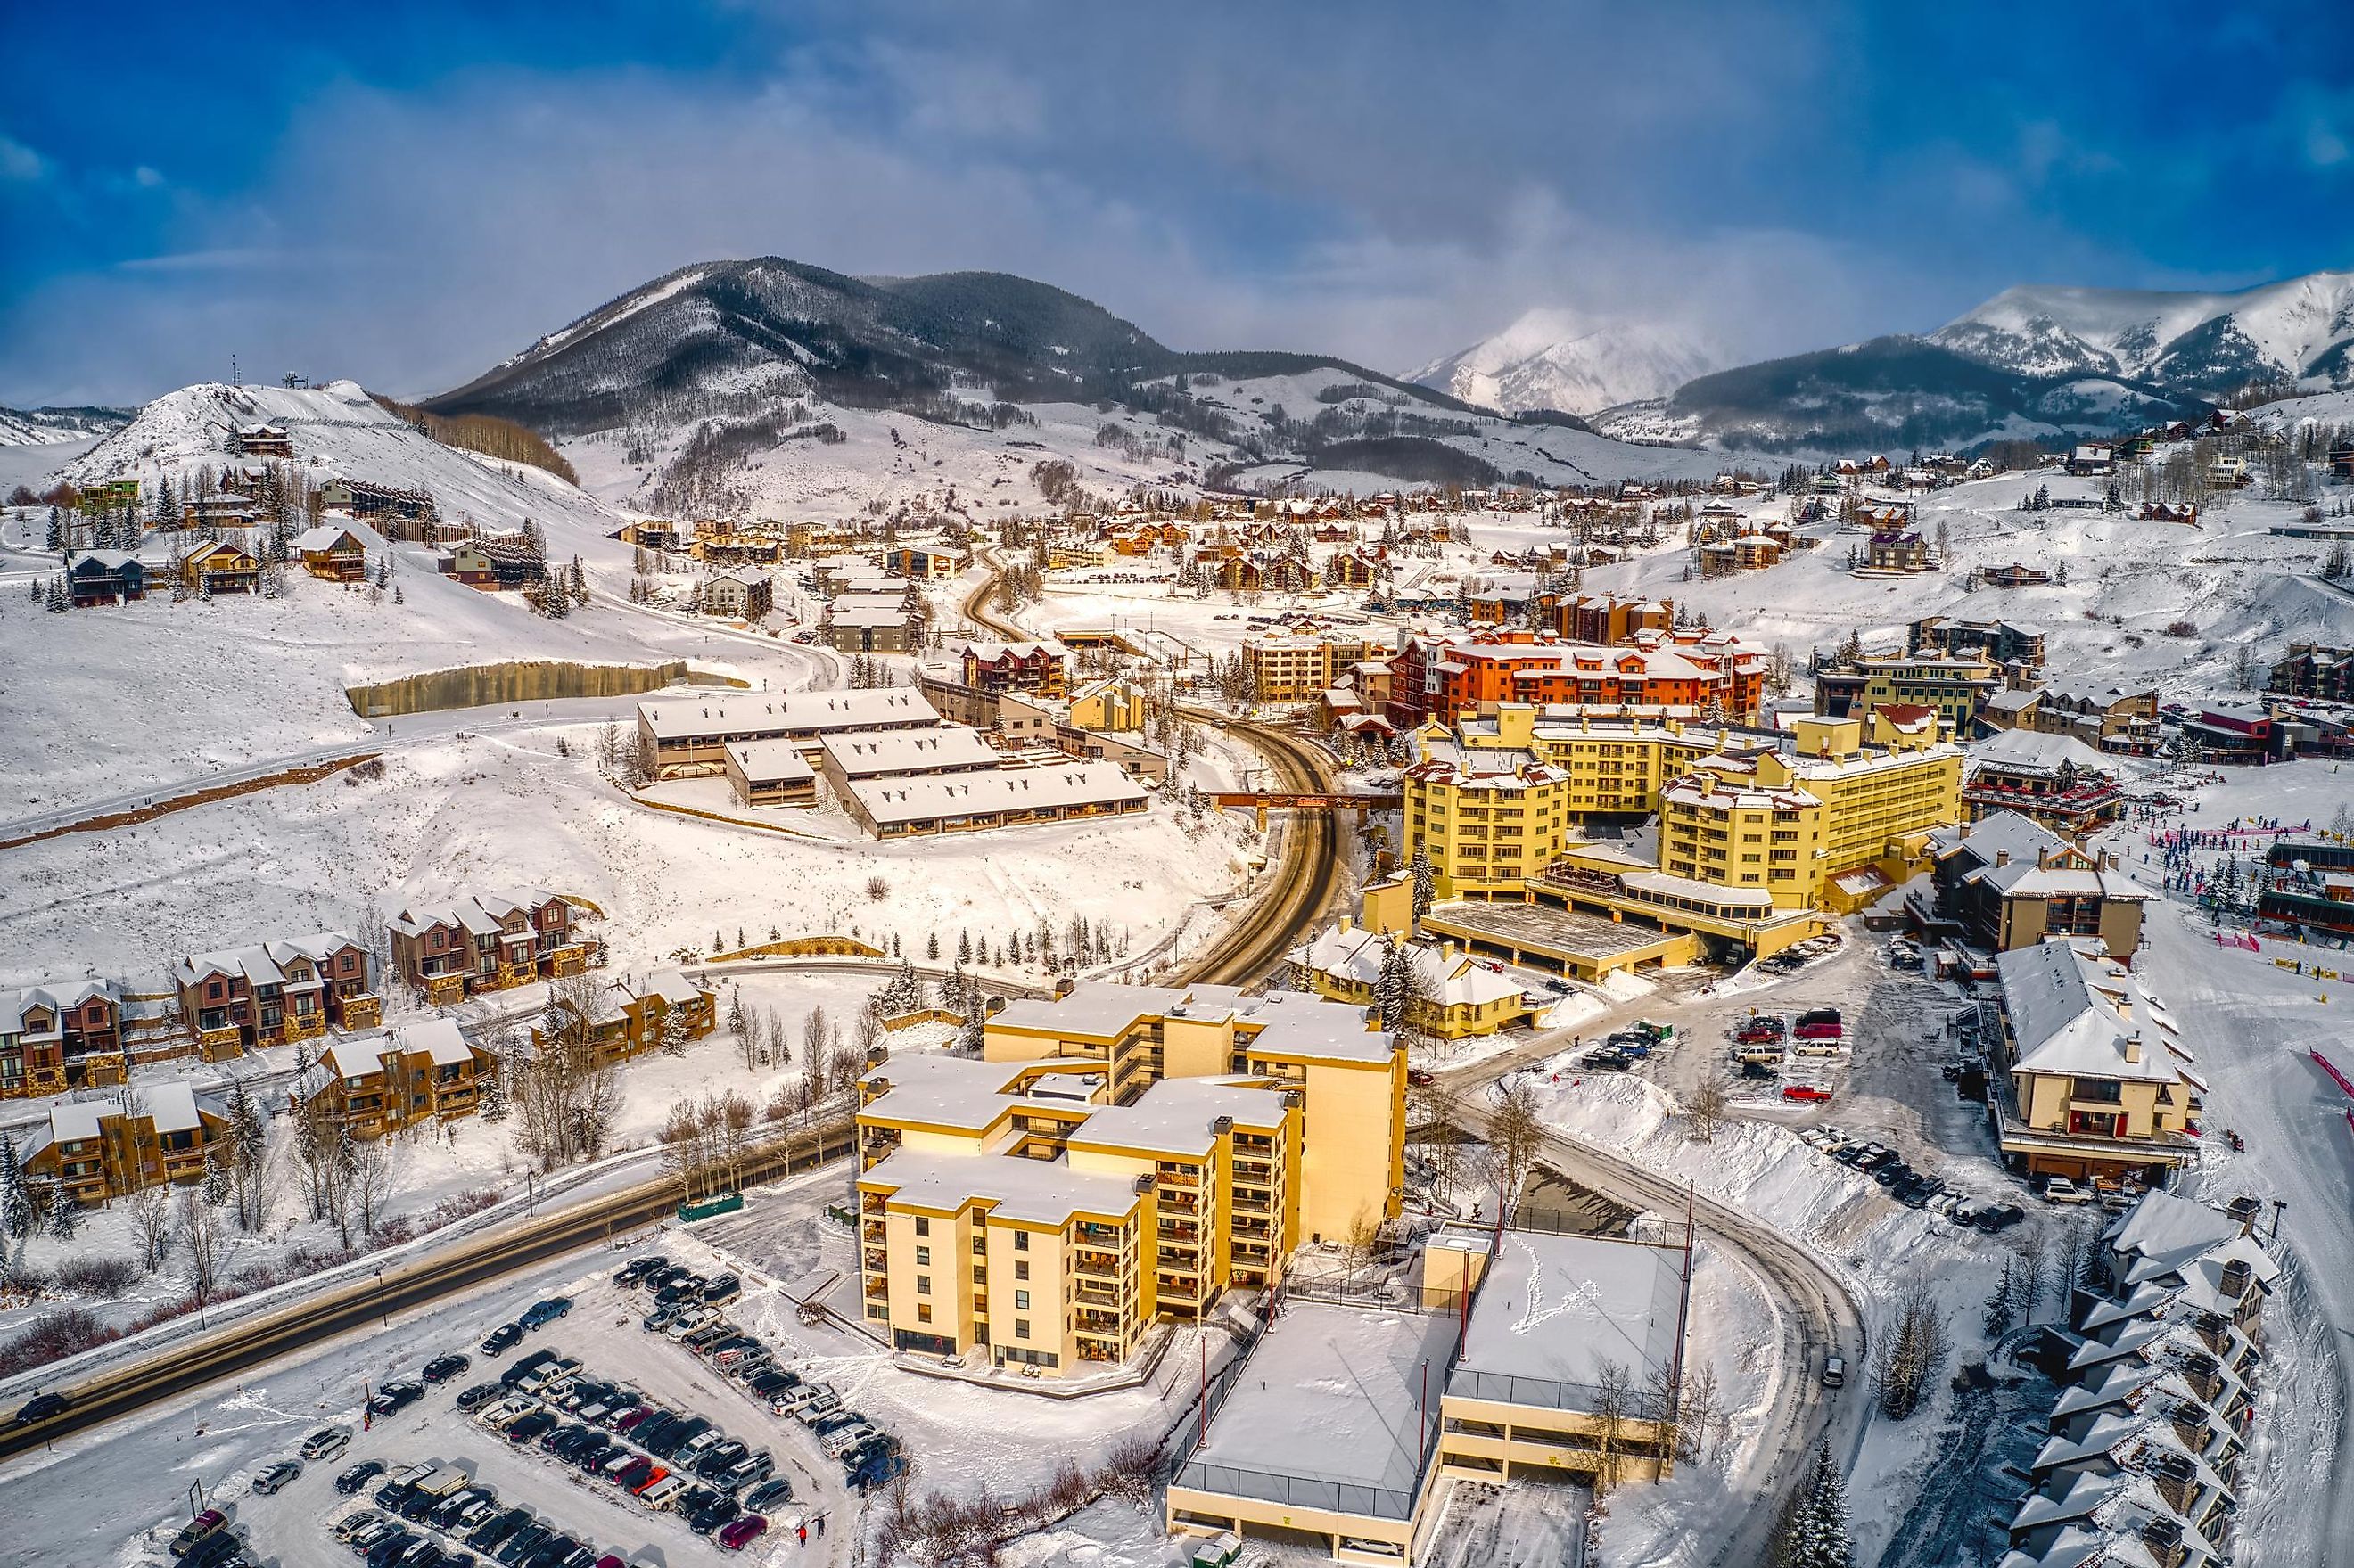 Aerial view of Crested Butte, Colorado.